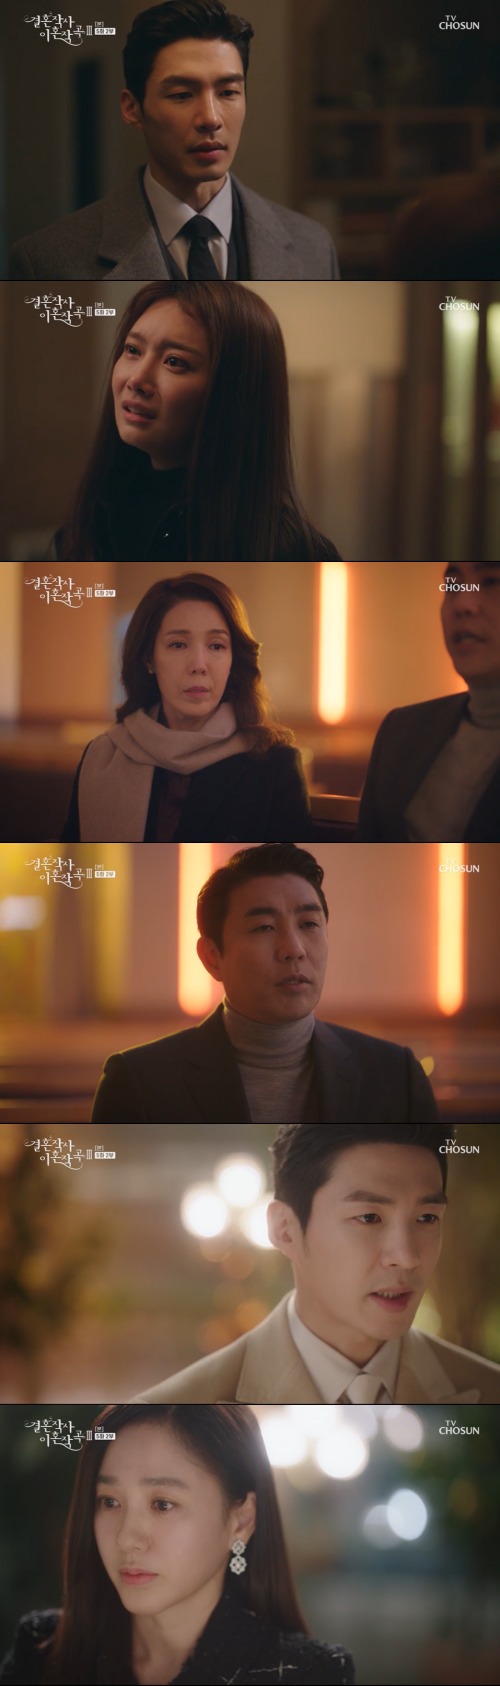 Seoul = = Marriage Writer Divorce Composition 3 vice president embarrassed Park Joo-Mi by telling Park Joo-Mi to marry him.On the weekend of TV Chosun, which was broadcast on the 12th, Drama Divorce Composition 3 (Phoebe, Im Sung-han)/Director Oh Sang-won, and Choi Young-soo/hereinafter, Gongsong 3), Seo Dong-ma (Boobae) who notified Nam Ga-bin (Lim Hye-young) of her separation to Park Joo-Mi I asked for a marriage.On this day, Seo Dong-ma said, I can not marry. Nam Ga-bin asked, Was it a sympathy? Seo Dong-ma said, Love is right.It should be more intense Feeling, not love, Nam said. Its not God, its the same person, its human, but Seo Dong-ma told him to just abandon himself.Nam Ga-bin slapped Seo Dong-ma on the cheek, saying, Did you see another woman? And Seo Dong-ma said, Its not your eyes, its your ears.I will compensate for any way, said Seo Dong-ma, who wailed. I thought it was stronger than anyone, but it was a mistake. I think its emotional perversion.Im going to be tough now, but Ill be more grateful now. Nam Ga-bin threw a vase. I love Nam Ga-bin, and I can not marry him in this state.The western half (Moon Seong-ho) entered the church while driving with Ishieun (Jeon Su-kyung). The western half told Ishieun, I have nothing special.You cant bring me to life. Theres nothing to say. No words, no hearts. Ishieuns heart. But thats desperate. Ive lived without hope.But I have. My self, nice and strange. If you refuse, think about it enough and do it in 50 years. Ishieun said that he thought of Ishi from the morning when he opened his eyes.The West half said he would marry Seo Dong-ma, who opposed the idea that his partner was divorced and that he had children, and that he would marry first, and that he had finished with Nam Ga-bin.Seo Dong-ma said, I was not sure, so I did it. Seo-ban said, I was punished. Bu-Hye-ryong (Lee, for example) accidentally met two people and joined the party.Buhye-ryong tried to talk to Seo Dong-ma about Lee Si-eun, but Seo Dong-ma drew a line saying that he did not think he was talking about it without him.Buhye-ryong asked if the divorce due to extramarital affairs was understood, and Seo Dong-ma said, I understand. He was sorry to miss the Western half, and he was black at Seo Dong-ma.Seo Dong-ma met Safi-young. Safi-young thought that Lees marriage would not be easy. Seo Dong-ma took her to a luxurious hotel.Seo Dong-ma told Safi Young, I want to marry Safi Young.